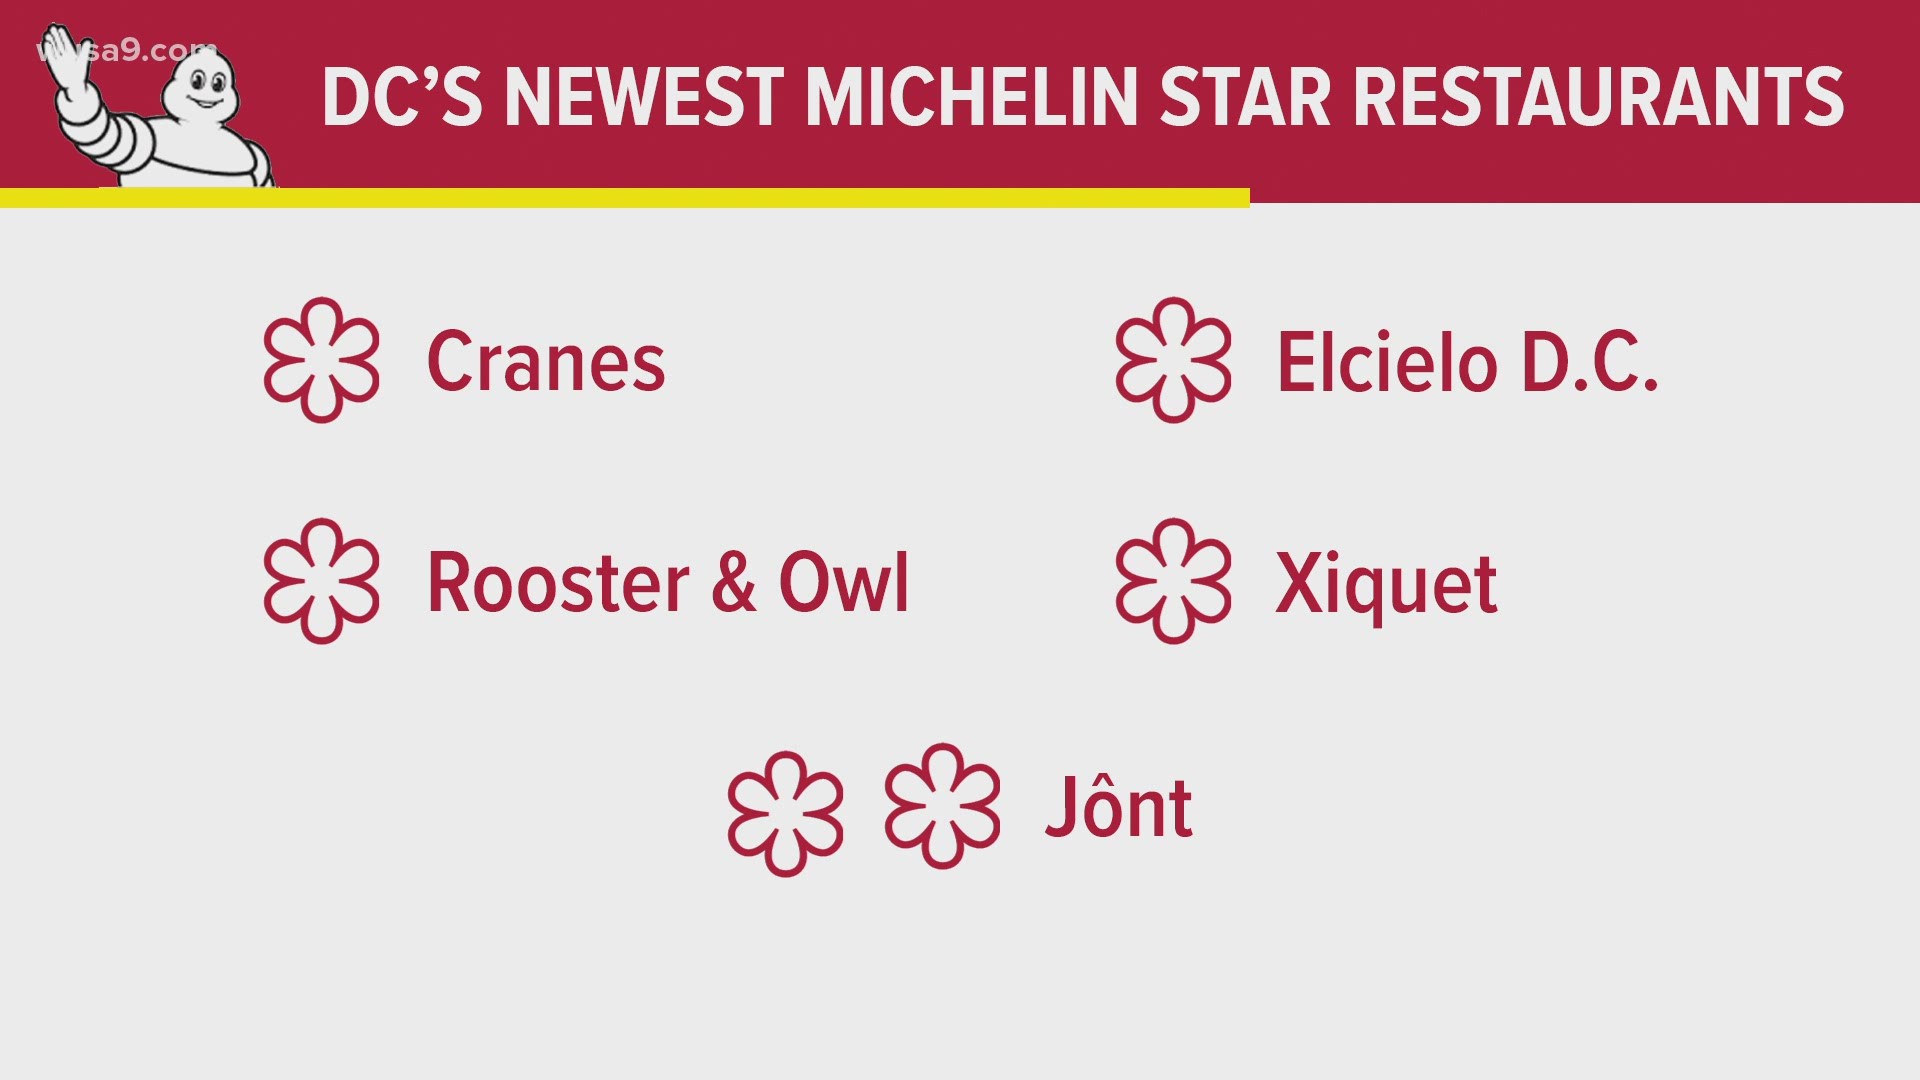 D.C. now boasts 23 restaurants with Michelin stars!